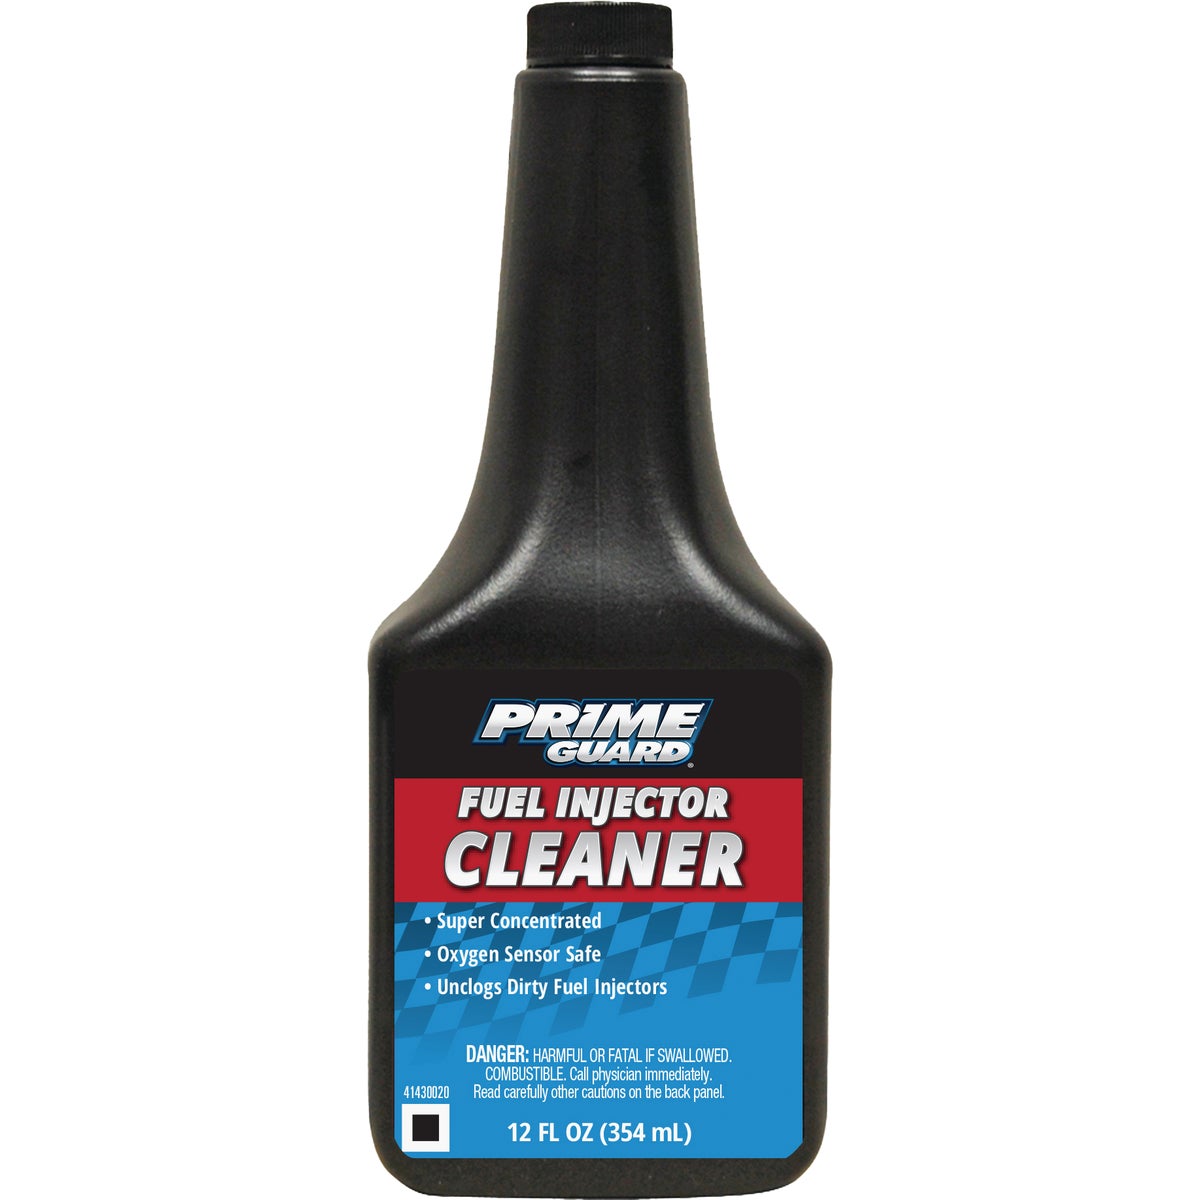 Item 584166, Reduces engine roughness and cleans entire fuel system.